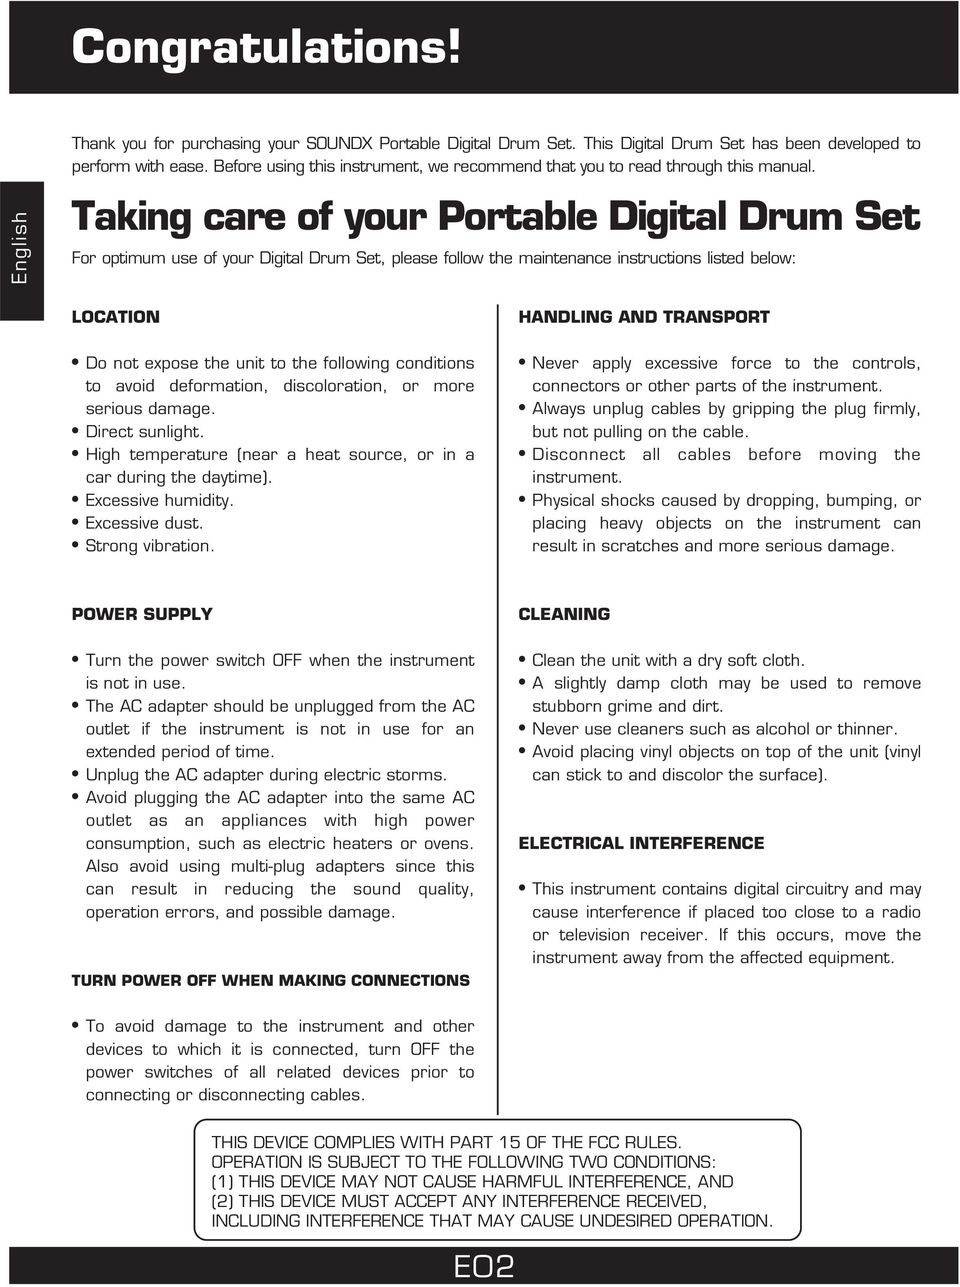 Taking care of your Portable Digital Drum Set For optimum use of your Digital Drum Set, please follow the maintenance instructions listed below: LOCATION Do not expose the unit to the following